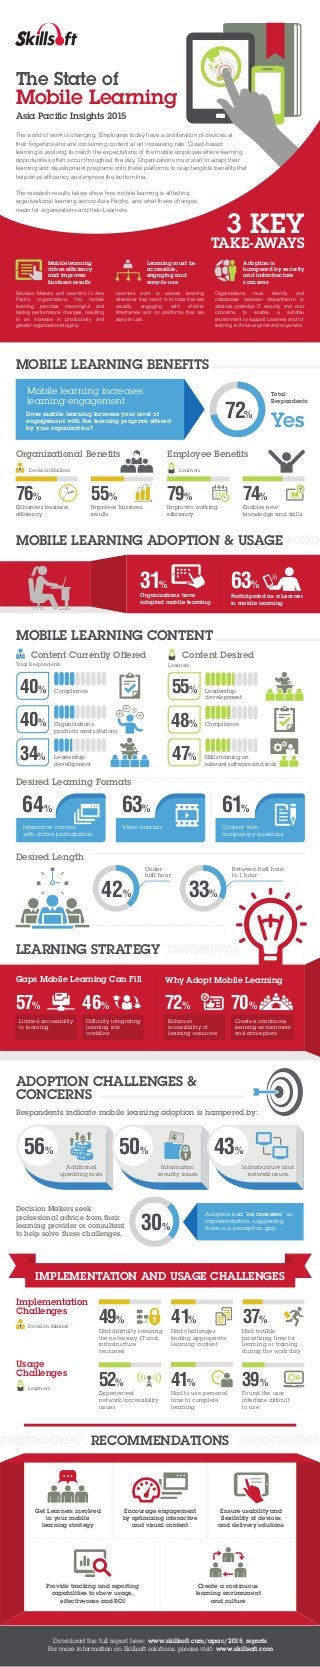 LEARNING STRATEGY
Why Adopt Mobile Learning
72%
Enhance
accessibility of
learning resources
70%
Create a continuous
learning environment
and atmosphere
Gaps Mobile Learning Can Fill
46%
Difﬁculty integrating
learning into
workﬂow
57%
Limited accessibility
to learning
MOBILE LEARNING ADOPTION & USAGE
63%
Participated as a Learner
in mobile learning
31%
Organizations have
adopted mobile learning
IMPLEMENTATION AND USAGE CHALLENGES
Learners
Usage
Challenges
Found the user
interface difﬁcult
to use
39%
Experienced
network/accessibility
issues
52%
Had to use personal
time to complete
learning
41%
Implementation
Challenges
Decision Makers
Had difﬁculty securing
the necessary IT and
infrastructure
resources
49%
Had challenges
ﬁnding appropriate
learning content
41%
Had trouble
prioritizing time for
learning or training
during the work day
37%
MOBILE LEARNING BENEFITS
Does mobile learning increase your level of
engagement with the learning program offered
by your organization?
Mobile learning increases
learning engagement
72%
Total
Respondents
Yes
Organizational Beneﬁts
Decision Makers
Improves business
results
55%
Enhances business
efﬁciency
76%
Learners
Employee Beneﬁts
Improves working
efﬁciency
79%
Enables new
knowledge and skills
74%
Interactive content
with active participation
64% 63%
Video tutorials Content with
compulsory questions
61%
Desired Learning Formats
MOBILE LEARNING CONTENT
Content Currently Offered
Total Respondents
Organization’s
products and solutions
40%
Leadership
development
34%
40% Compliance
Learners
Content Desired
Leadership
development
55%
48% Compliance
Skills training on
relevant software and tools
47%
ADOPTION CHALLENGES &
CONCERNS
Respondents indicate mobile learning adoption is hampered by:
30%
Decision Makers seek
professional advice from their
learning provider or consultant
to help solve these challenges.
Adopters had “no concerns” on
implementation, suggesting
there is a perception gap.
Additional
operating costs
56%
Information
security issues
50%
Infrastructure and
network issues
43%
Desired Length
Under
half hour
42%
Between half hour
to 1 hour
33%
Download the full report here: www.skillsoft.com/apac/2015_reports
For more information on Skillsoft solutions, please visit: www.skillsoft.com
RECOMMENDATIONS
Encourage engagement
by optimizing interactive
and visual content
Provide tracking and reporting
capabilities to show usage,
effectiveness and ROI
Get Learners involved
in your mobile
learning strategy
Create a continuous
learning environment
and culture
Ensure usability and
ﬂexibility of devices
and delivery solutions
3 KEY
TAKE-AWAYS
Mobile learning
drives efﬁciency
and improves
business results
Decision Makers and Learners in Asia
Pacific organizations find mobile
learning provides meaningful and
lasting performance changes, resulting
in an increase in productivity and
greater organizational agility.
Learning must be
accessible,
engaging and
easy-to-use
Learners want to access learning
whenever they need; in formats that are
visually engaging with shorter
timeframes and on platforms that are
easy-to-use.
Adoption is
hampered by security
and infrastructure
concerns
Organizations must identify and
collaborate between departments to
address potential IT security and cost
concerns to enable a suitable
environment to support Learners and for
learning to thrive anytime and anywhere.
The State of
Mobile Learning
Asia Paciﬁc Insights 2015
The world of work is changing. Employees today have a proliferation of devices at
their fingertips and are consuming content at an increasing rate. Cloud-based
learning is evolving to match the expectations of the mobile employee where learning
opportunities often occur throughout the day. Organizations must start to adapt their
learning and development programs onto these platforms to reap tangible benefits that
help drive efficiency and improve the bottom line.
The research results below show how mobile learning is affecting
organizational learning across Asia Pacific, and what these changes
mean for organizations and their Learners.
 